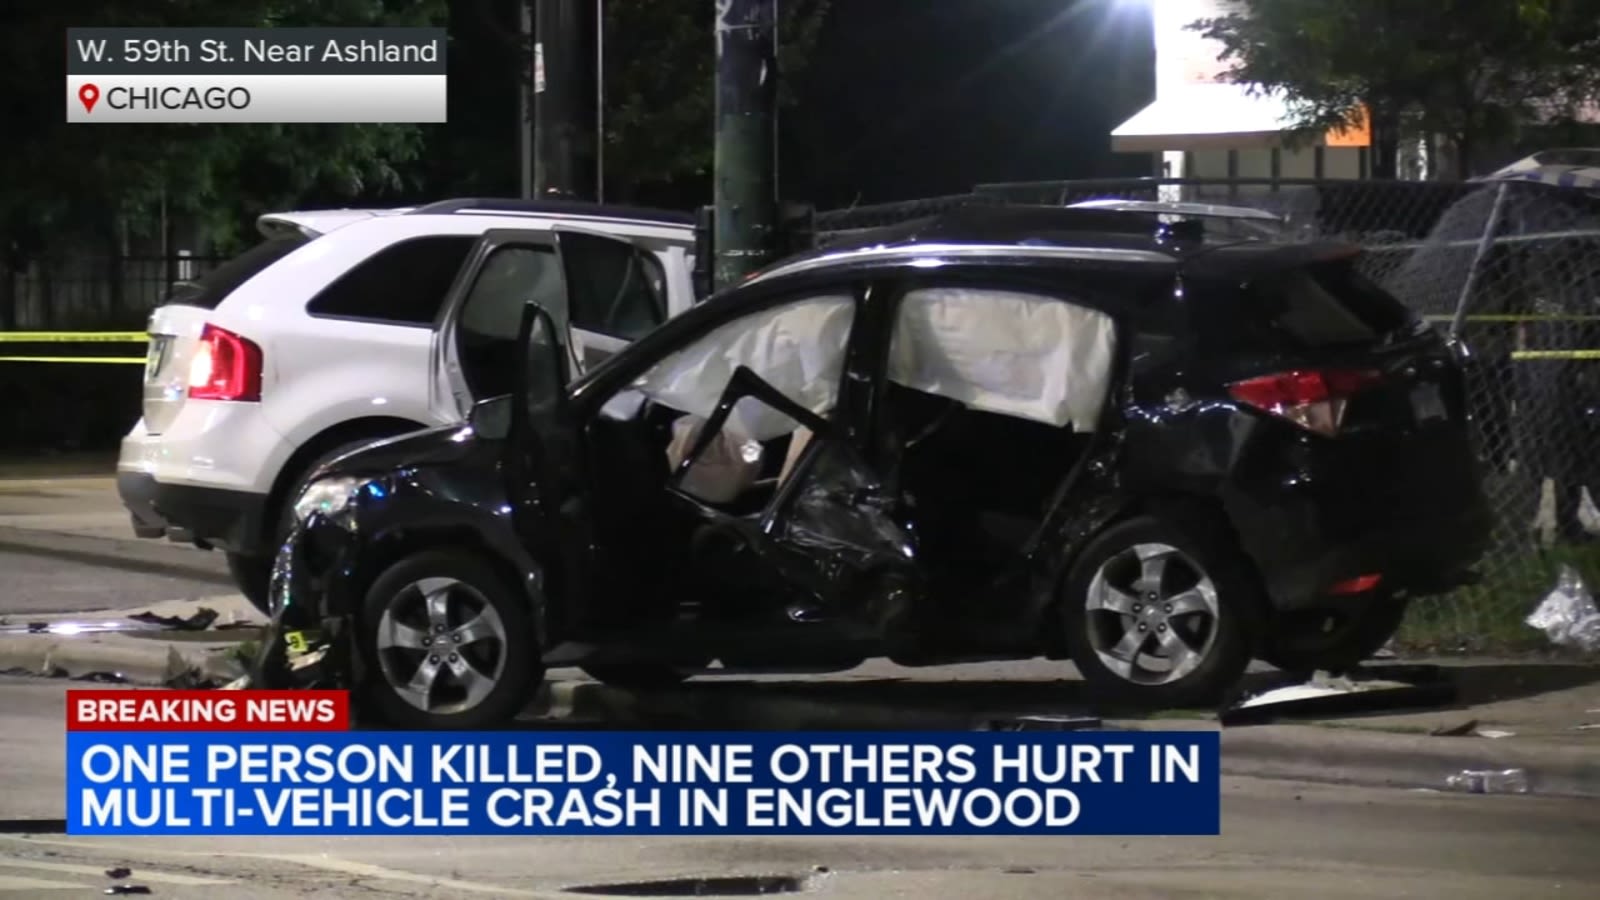 Man killed, 9 people hurt in multi-vehicle crash in Englewood, Chicago police say